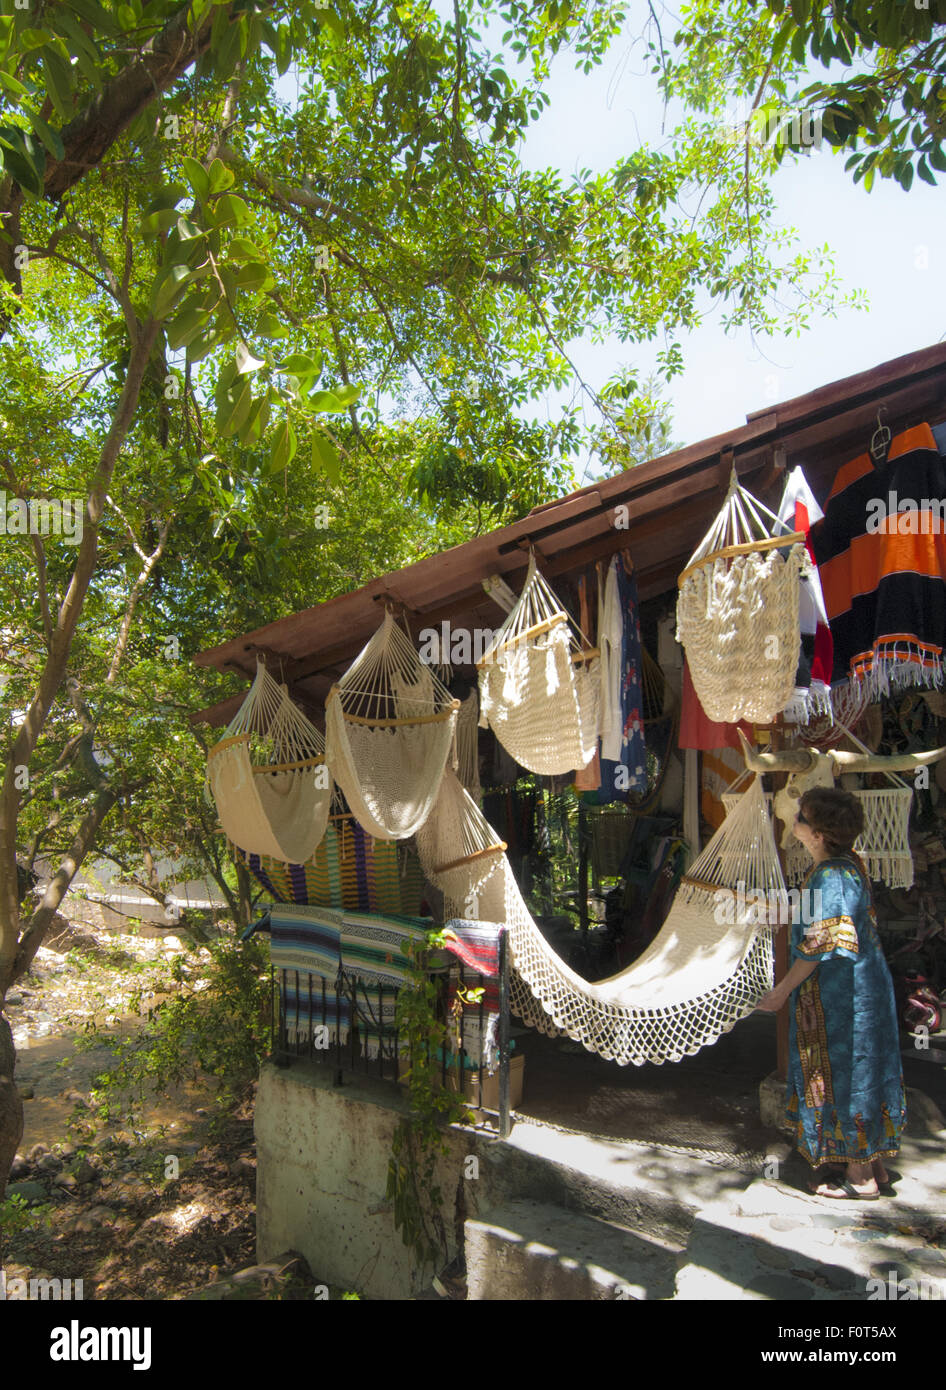 Woman shopper inspects hammocks in a shop on Cuale River Island, a vibrant market place in Puerto Vallarta, Mexico. Stock Photo